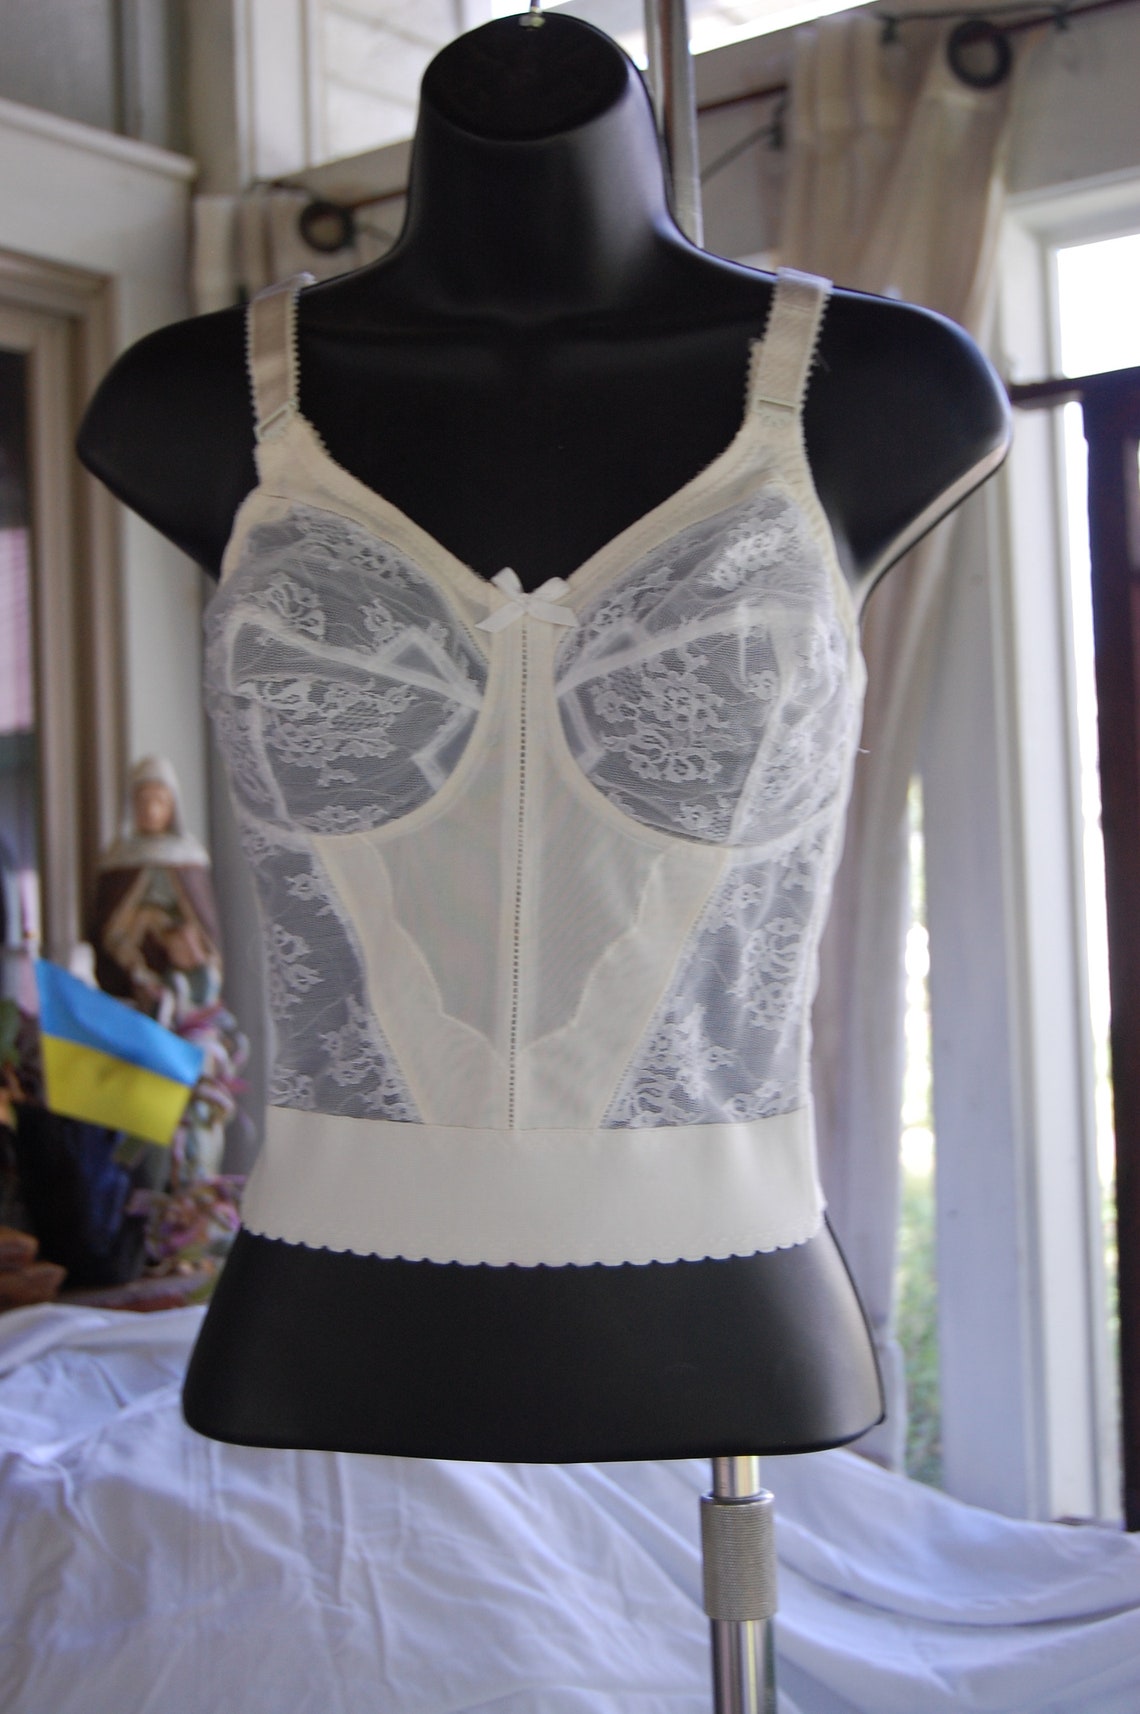 1980s Bali Long Line Bra Lace Cups and Lace Sheer Front Panels 36C - Etsy